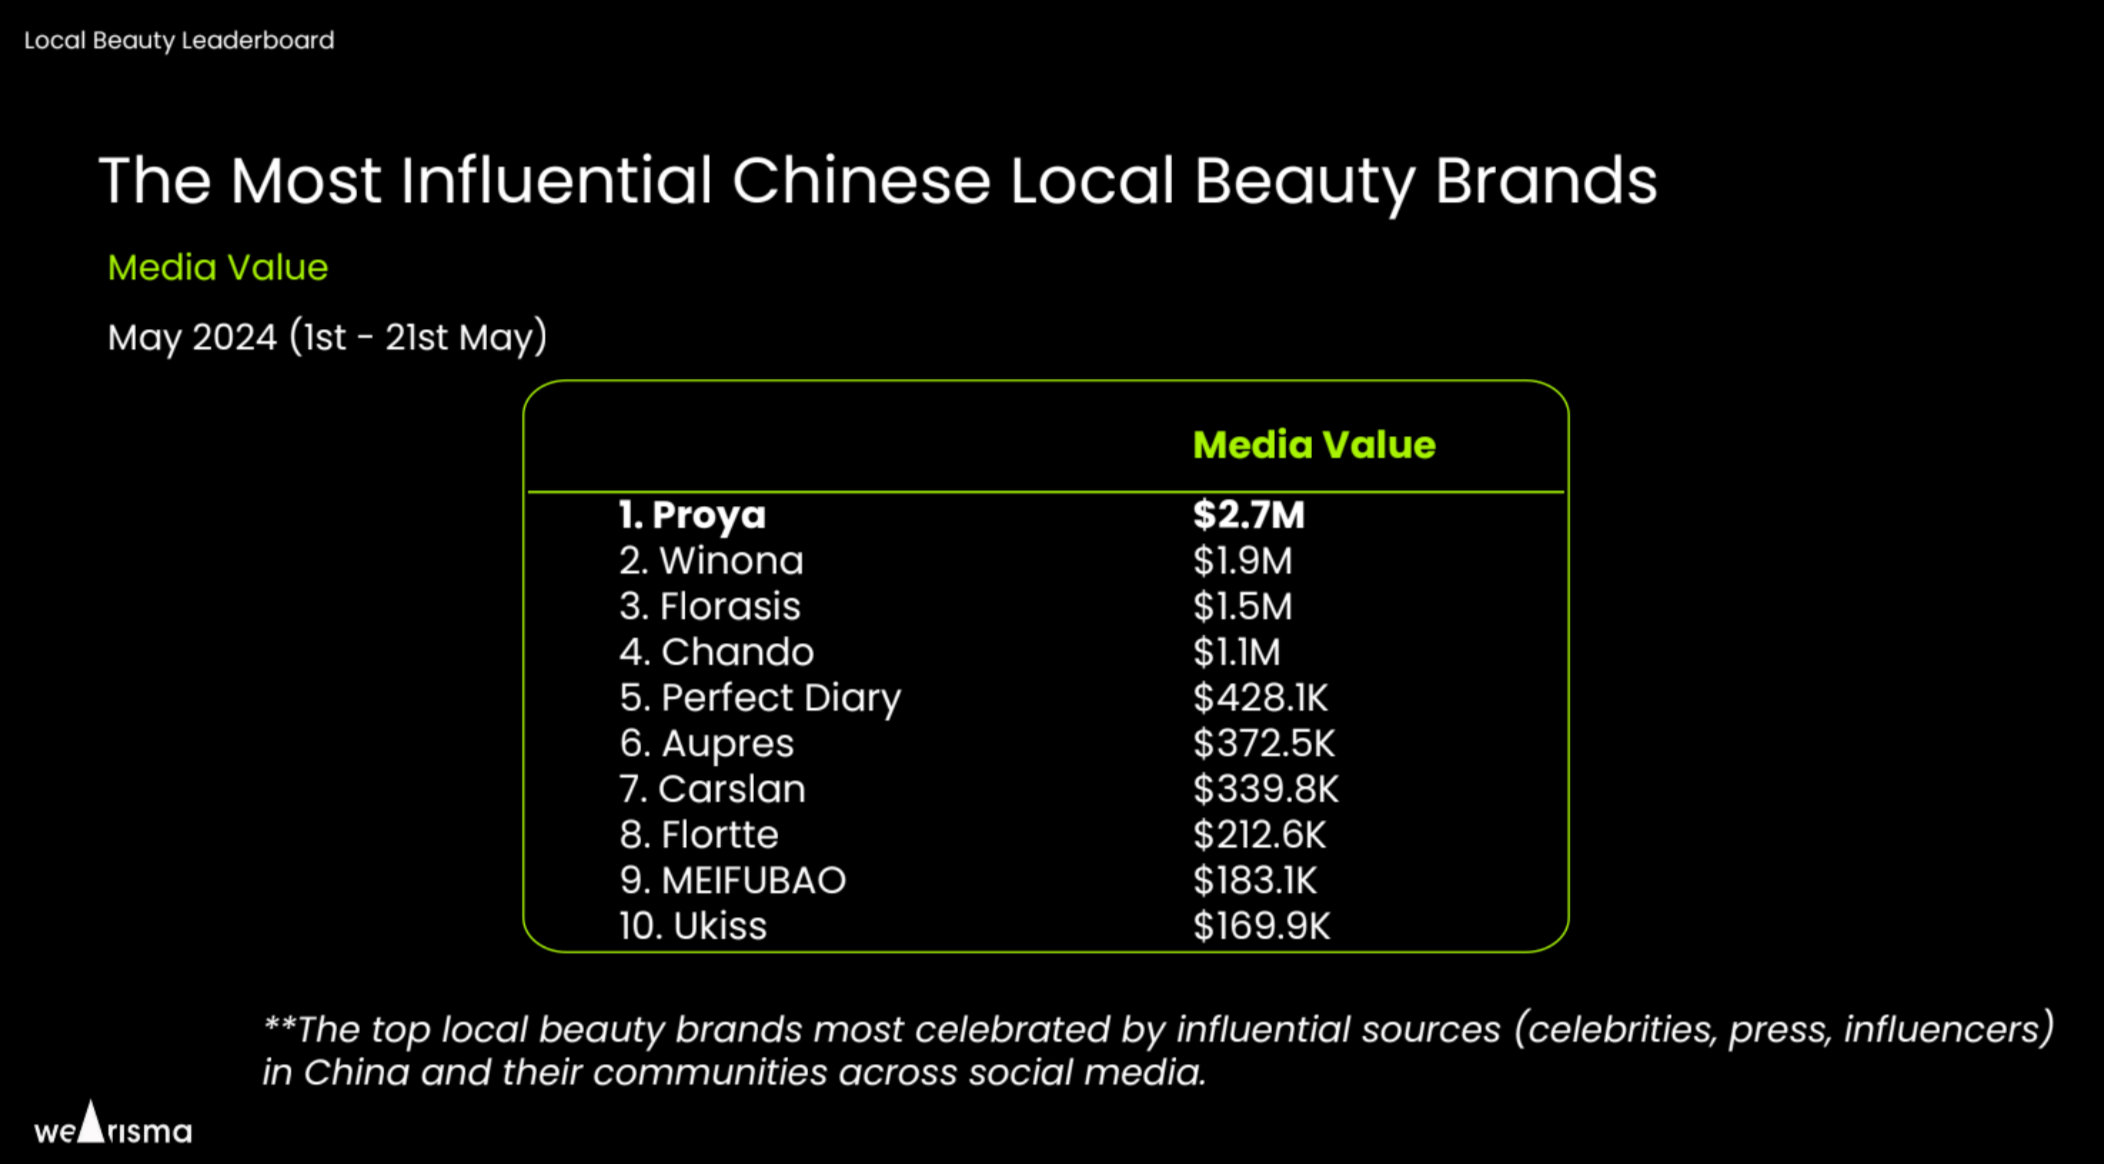 The top local beauty brands in China based on media value. Image: WeArisma